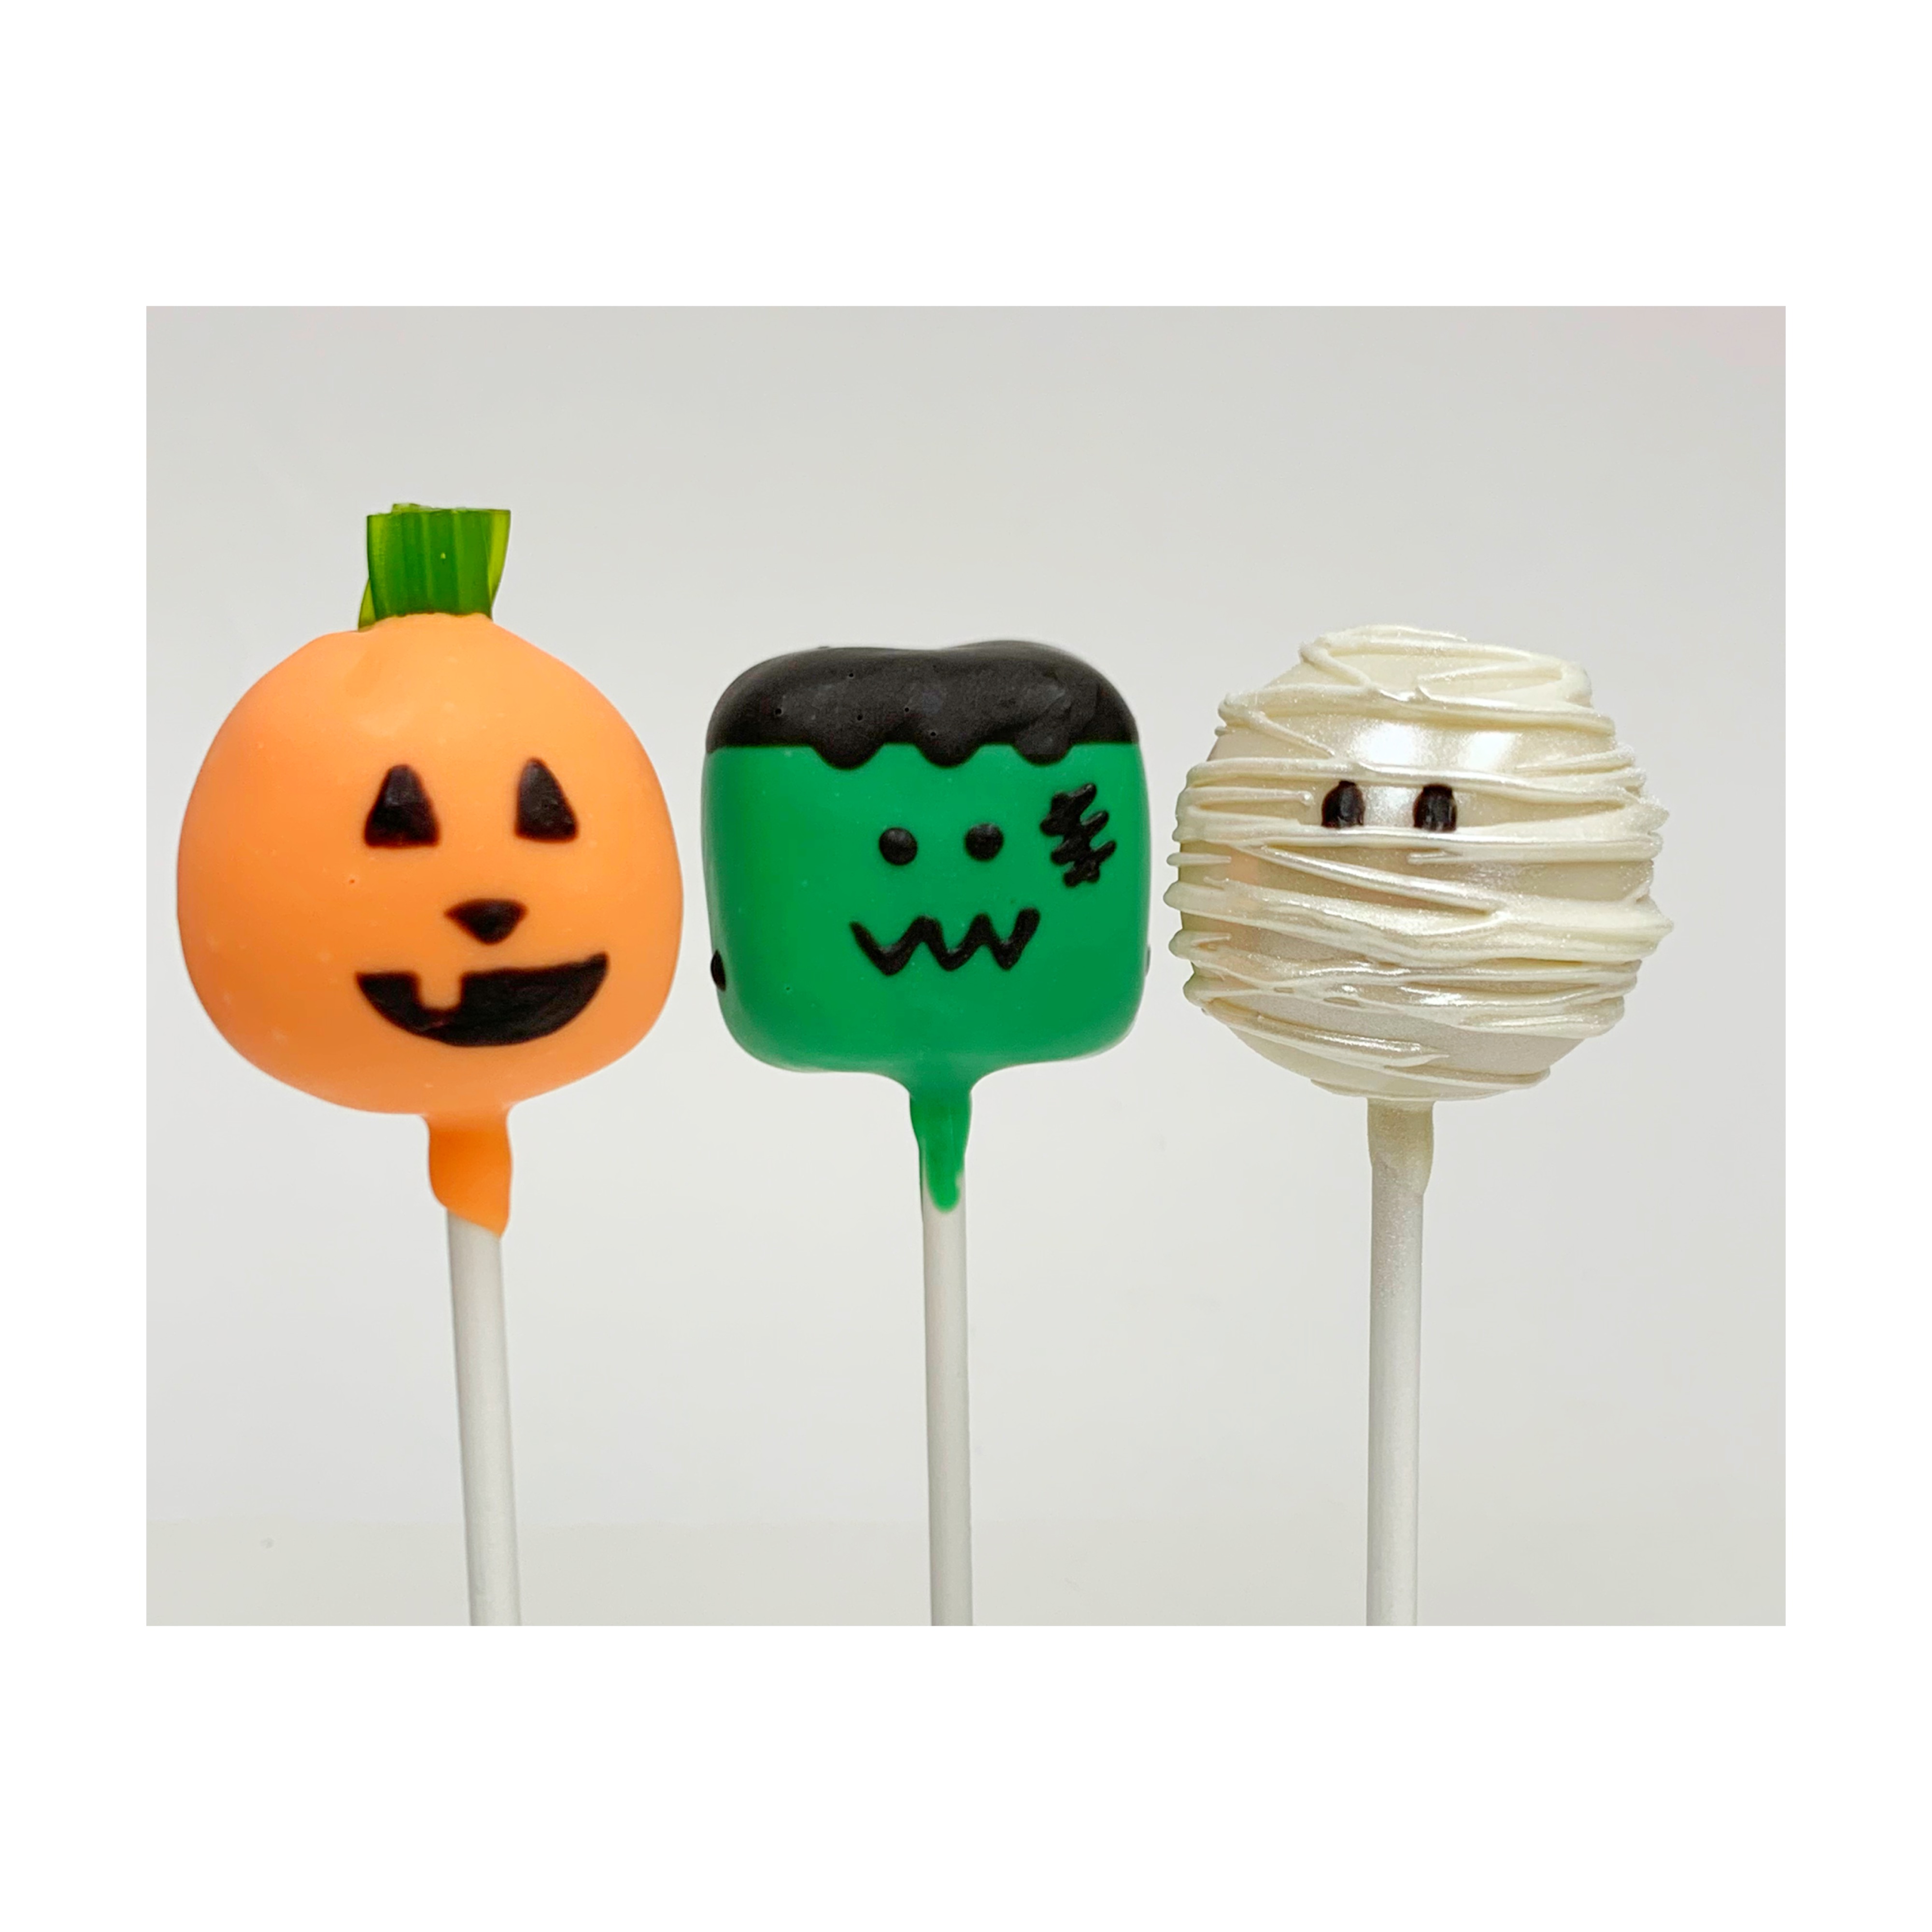 Halloween Spider Cake Pops Recipe: Turn Cake Pops Into Spooky Spiders for  Halloween Fun | Holidays | 30Seconds Food